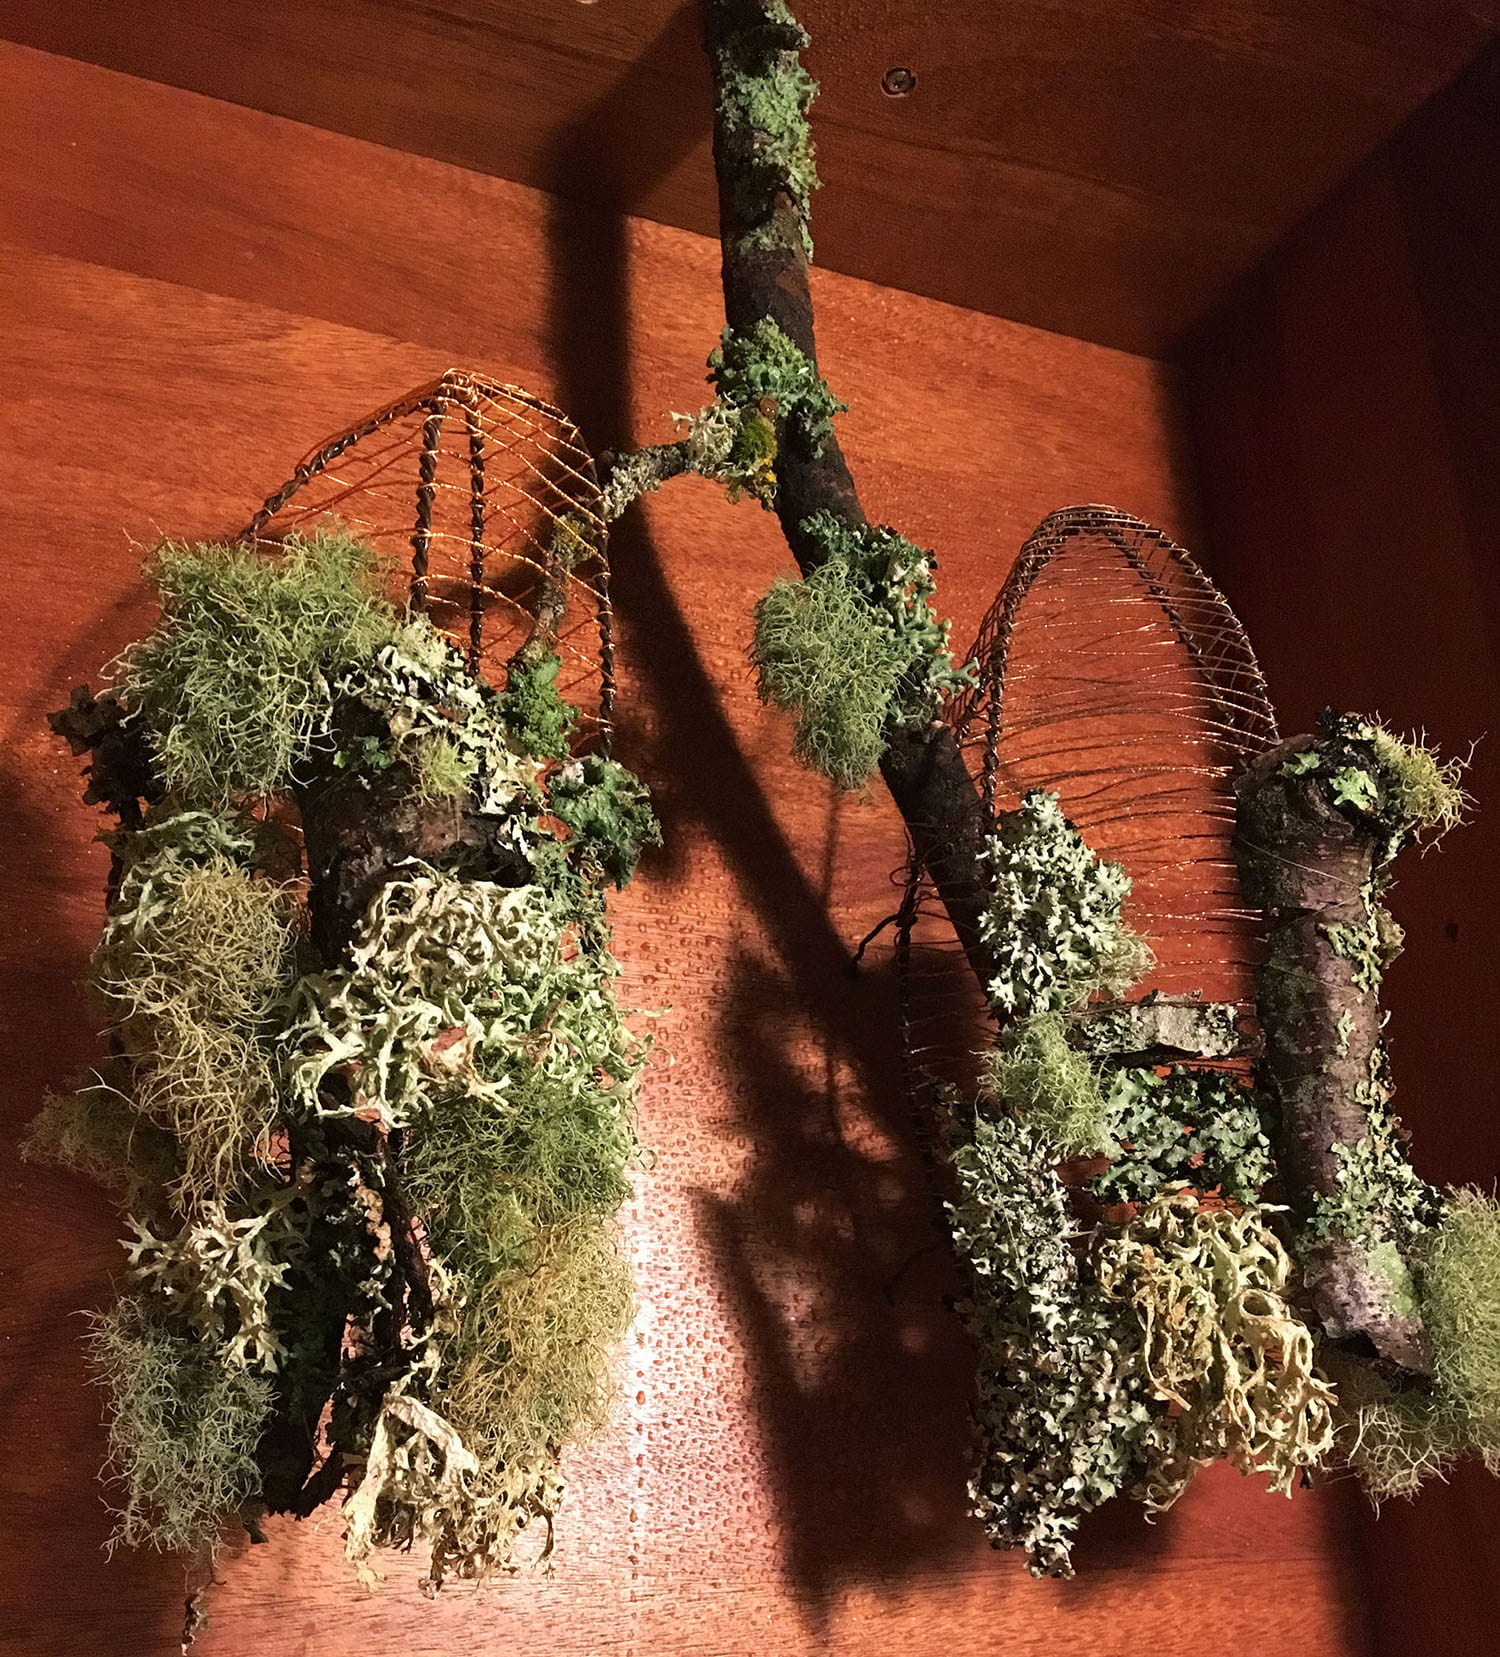 mossy, lichen covered branches and twigs crafted in the shape of lungs